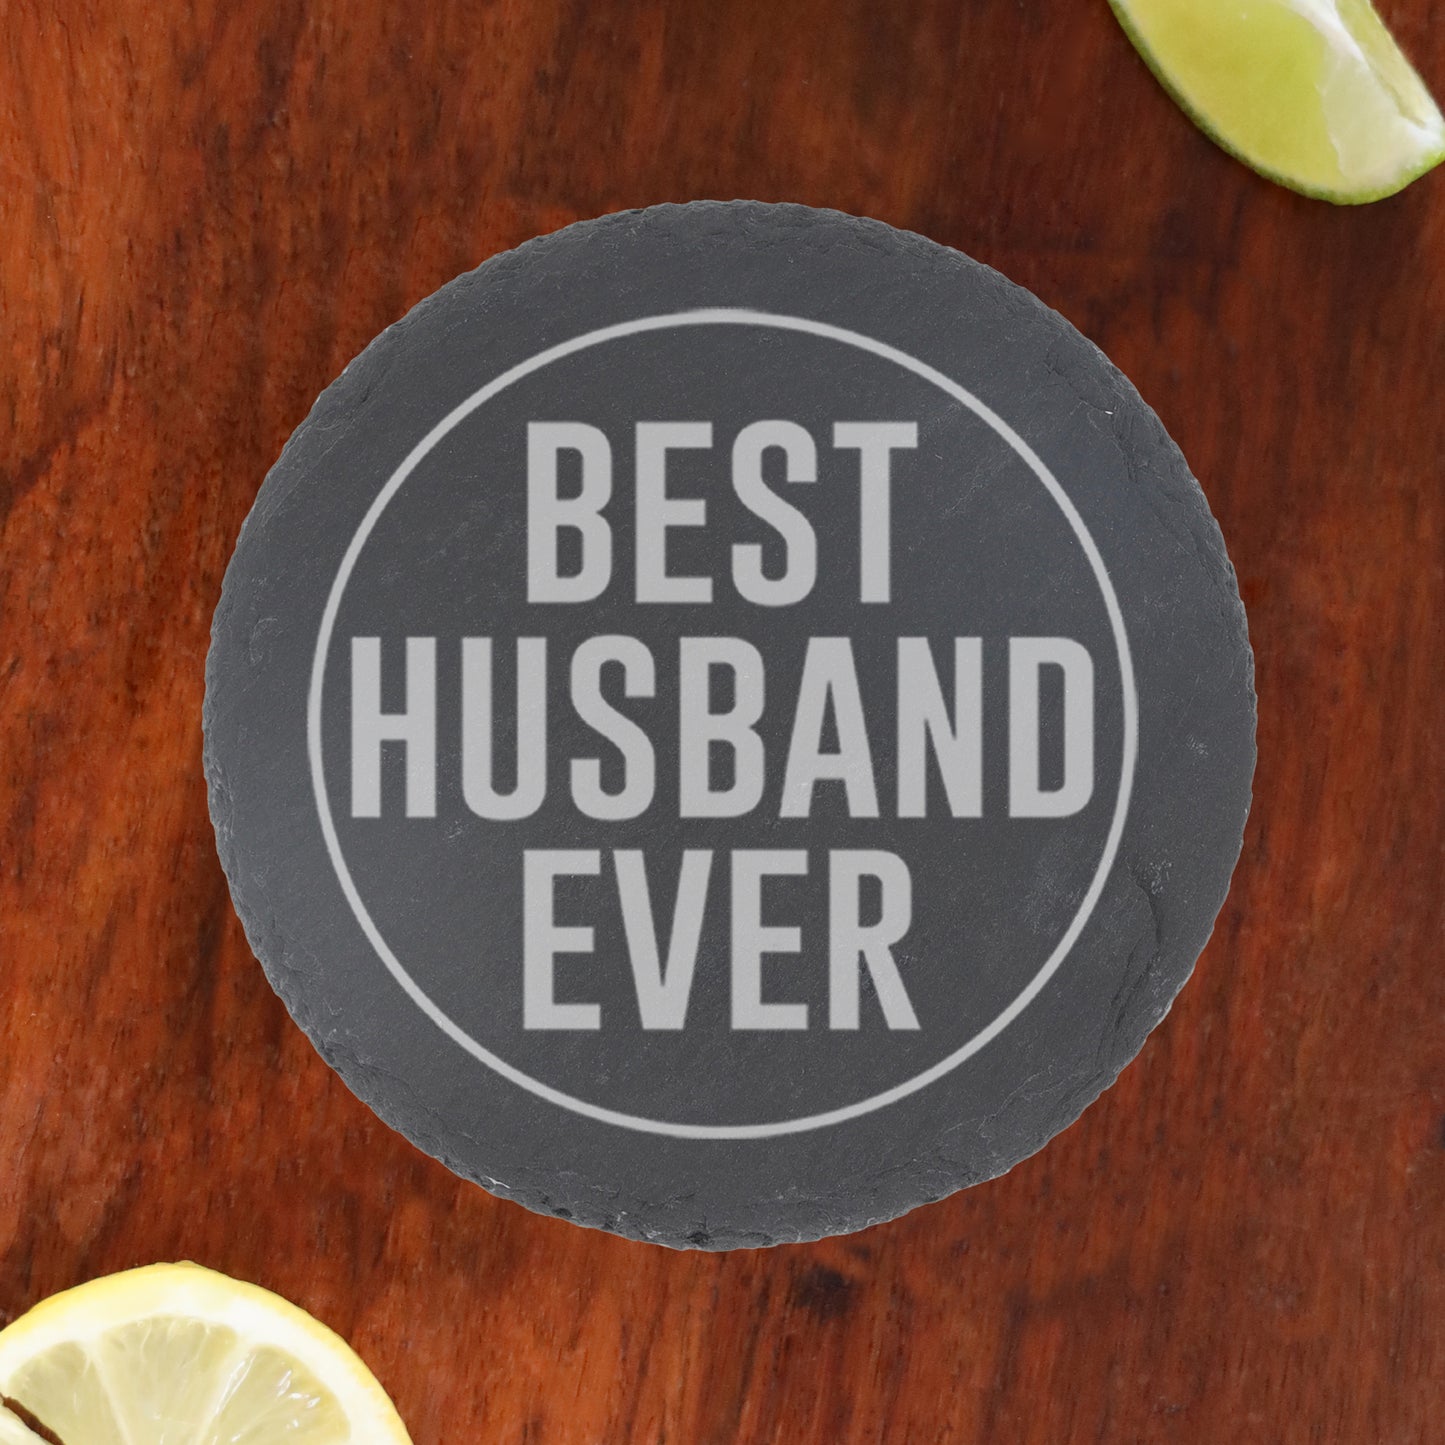 Best Husband Ever Engraved Wine Glass and/or Coaster Gift  - Always Looking Good - Round Coaster Only  